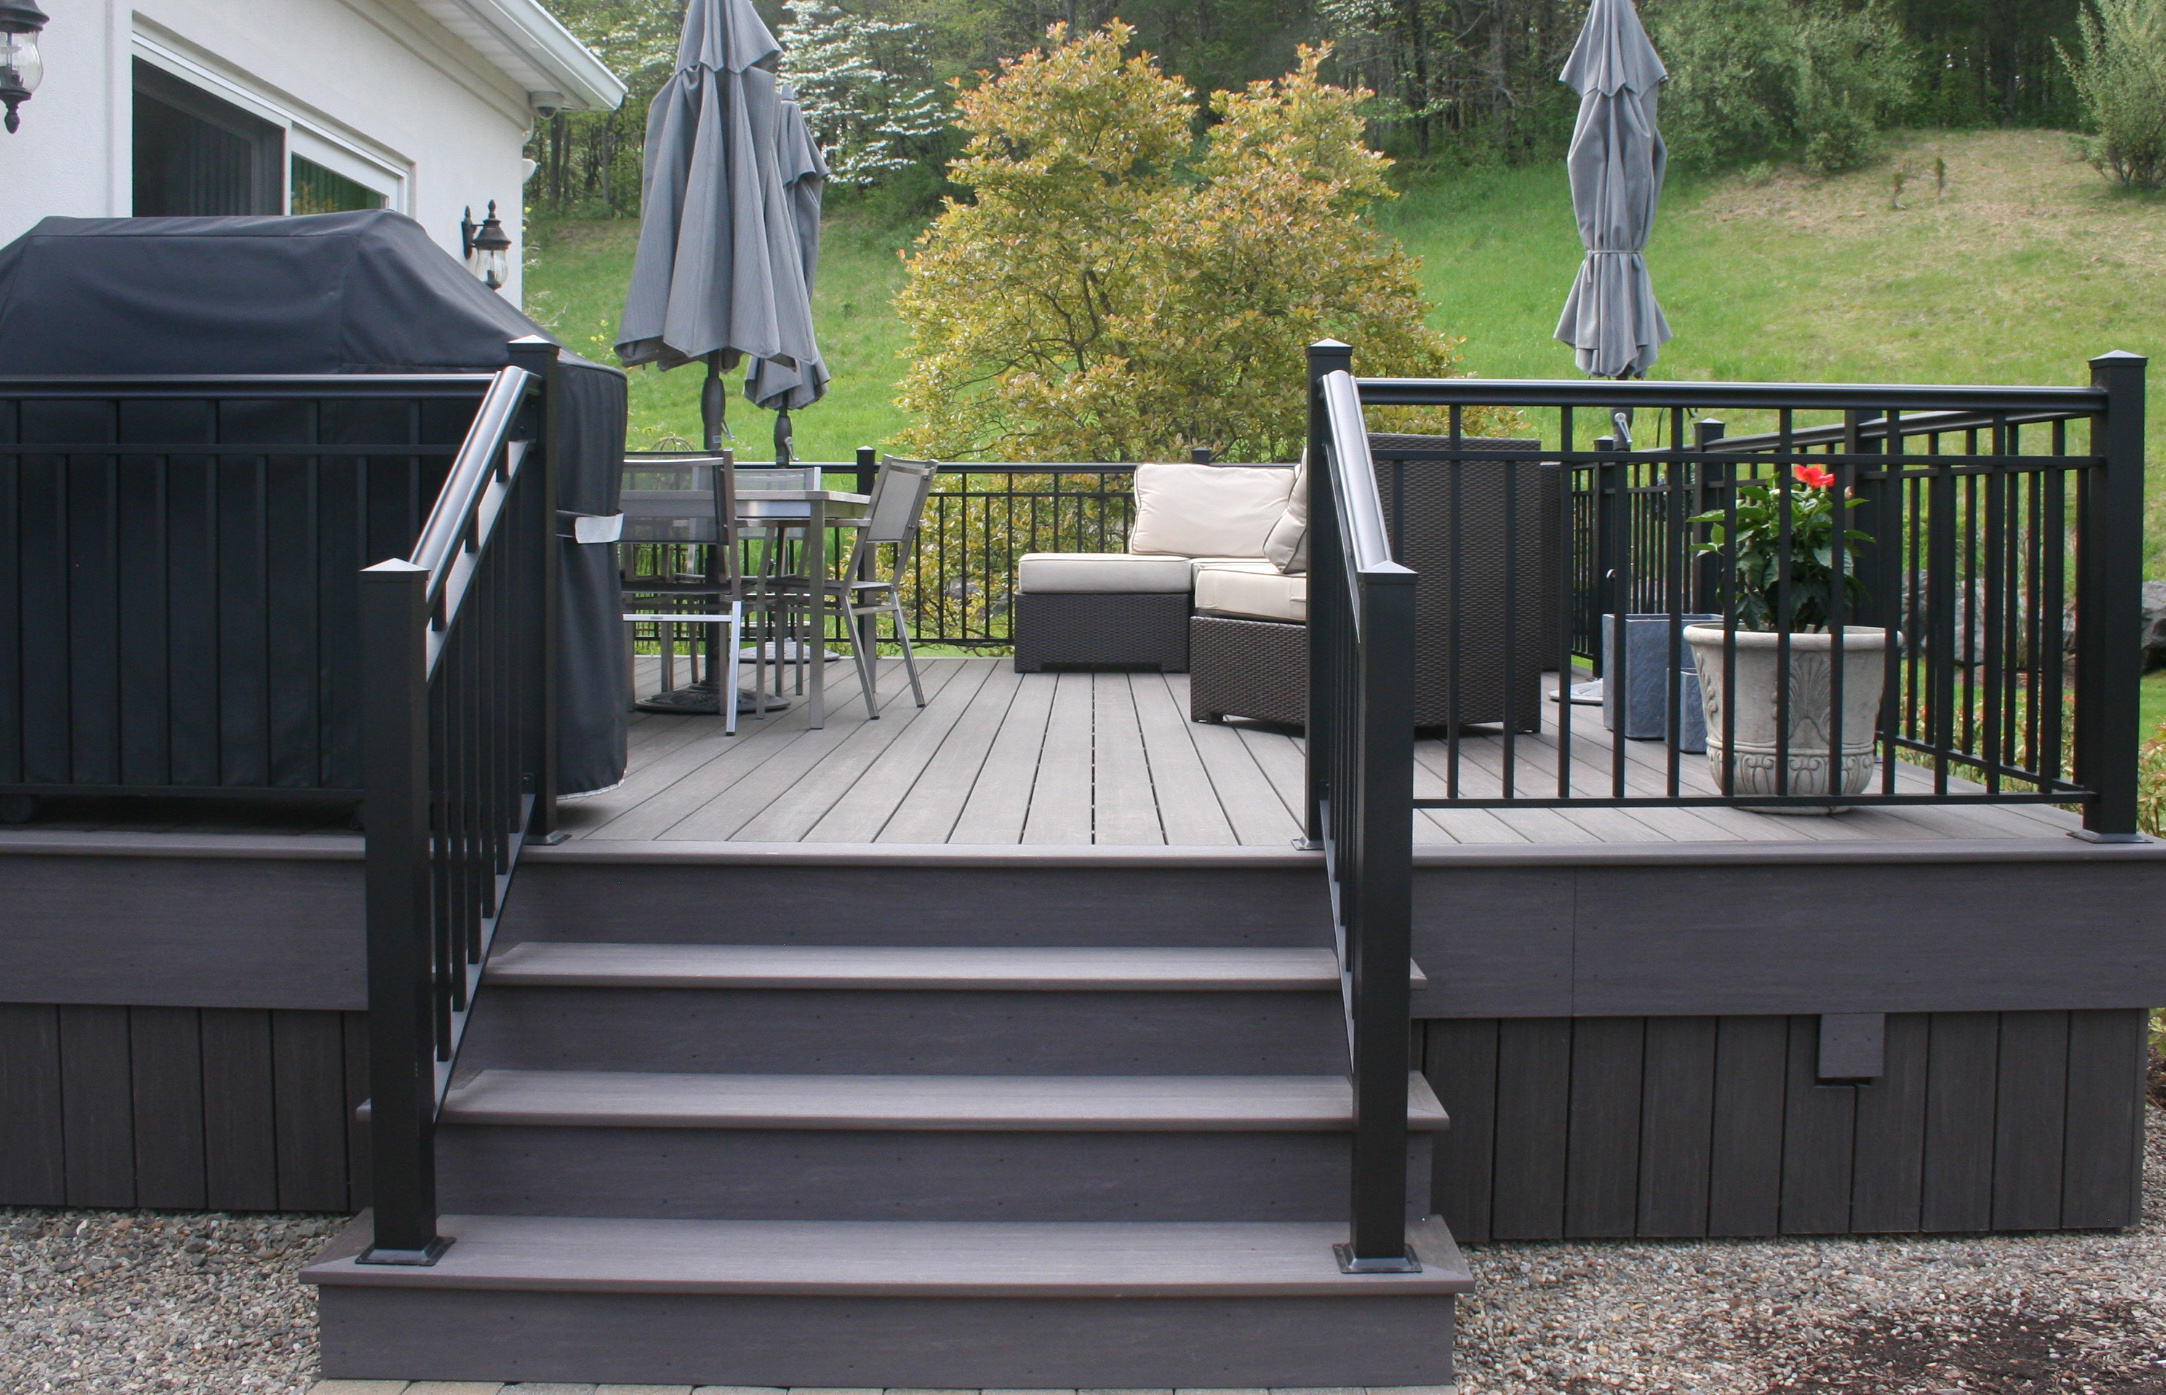 The homeowner has held parties on this beautifully crafted AZEK deck throughout the summer.